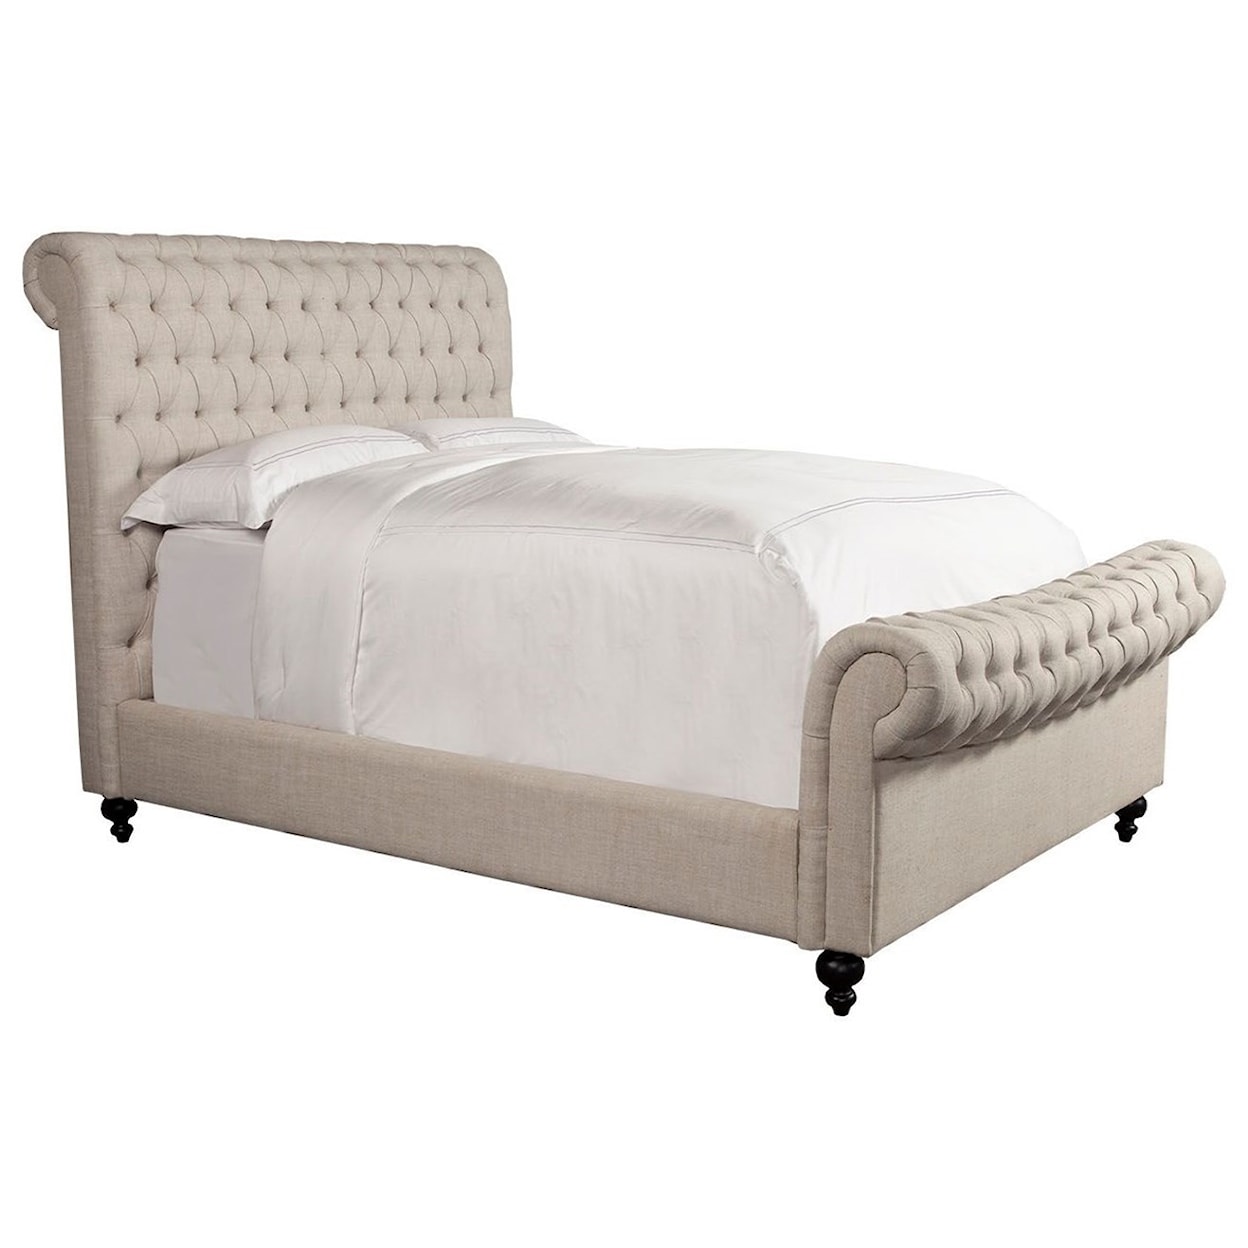 Paramount Living Jackie Queen Upholstered Sleigh Bed